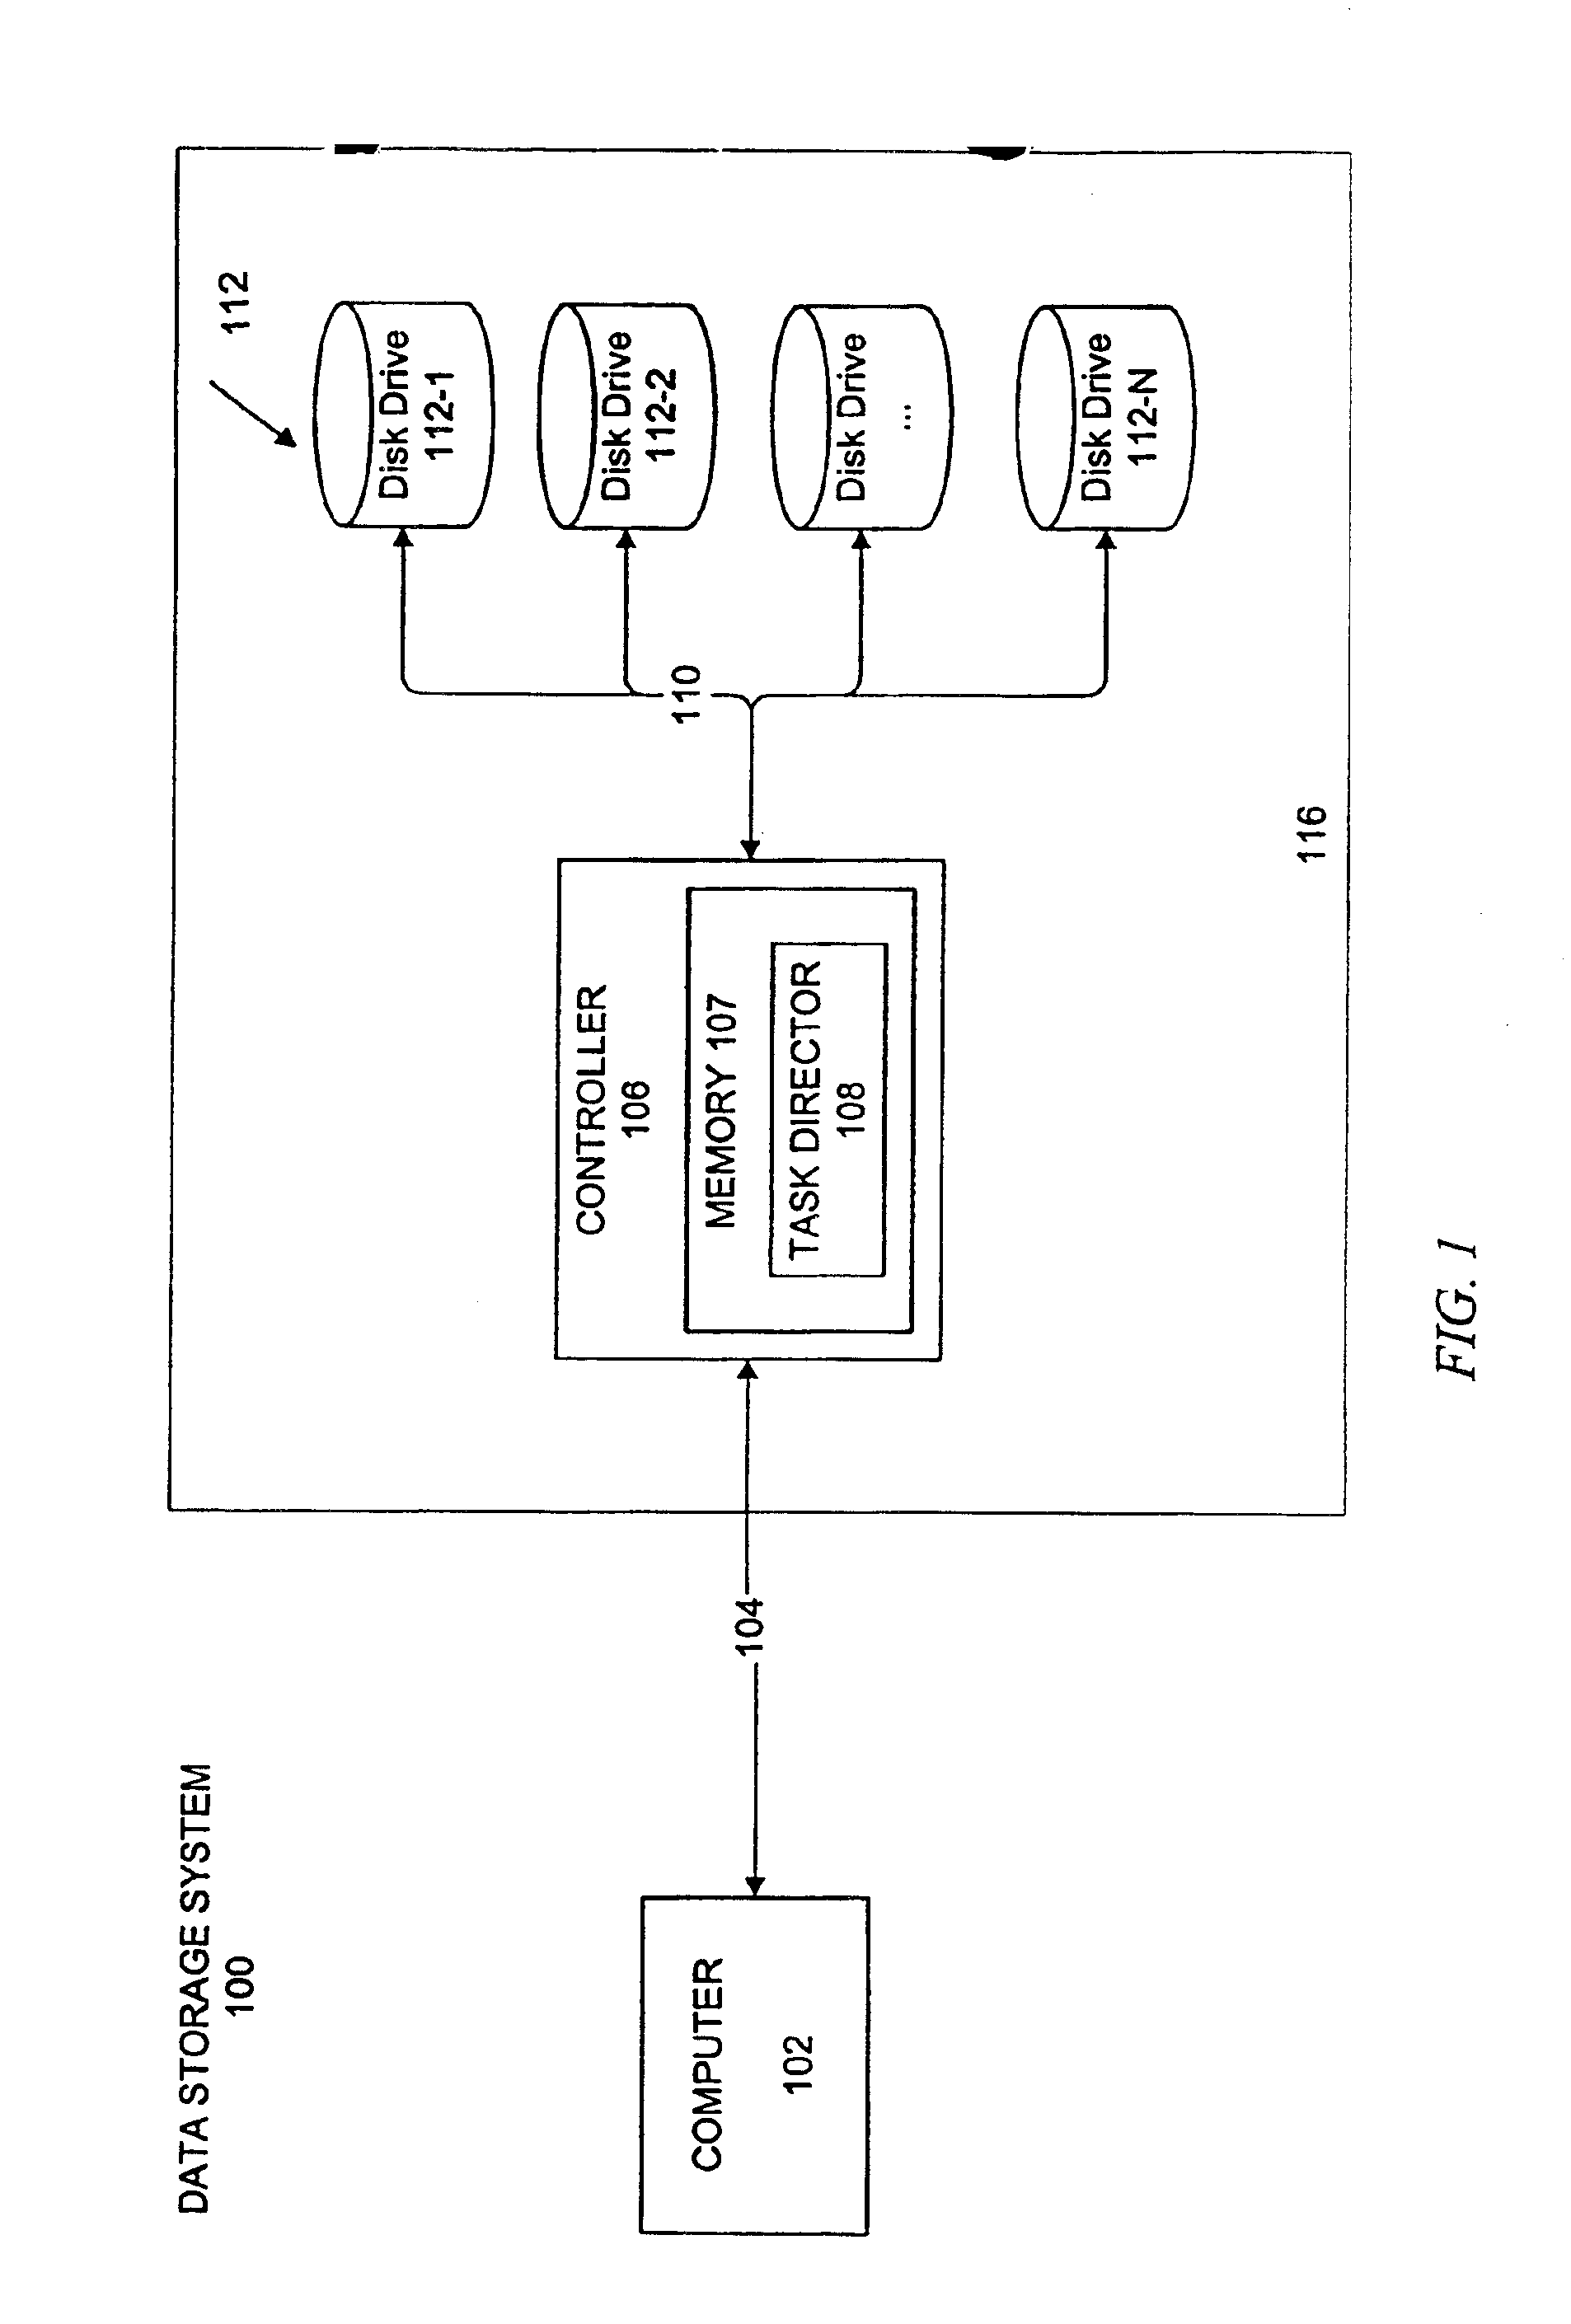 System and method to coordinate data storage device management operations in a data storage subsystem